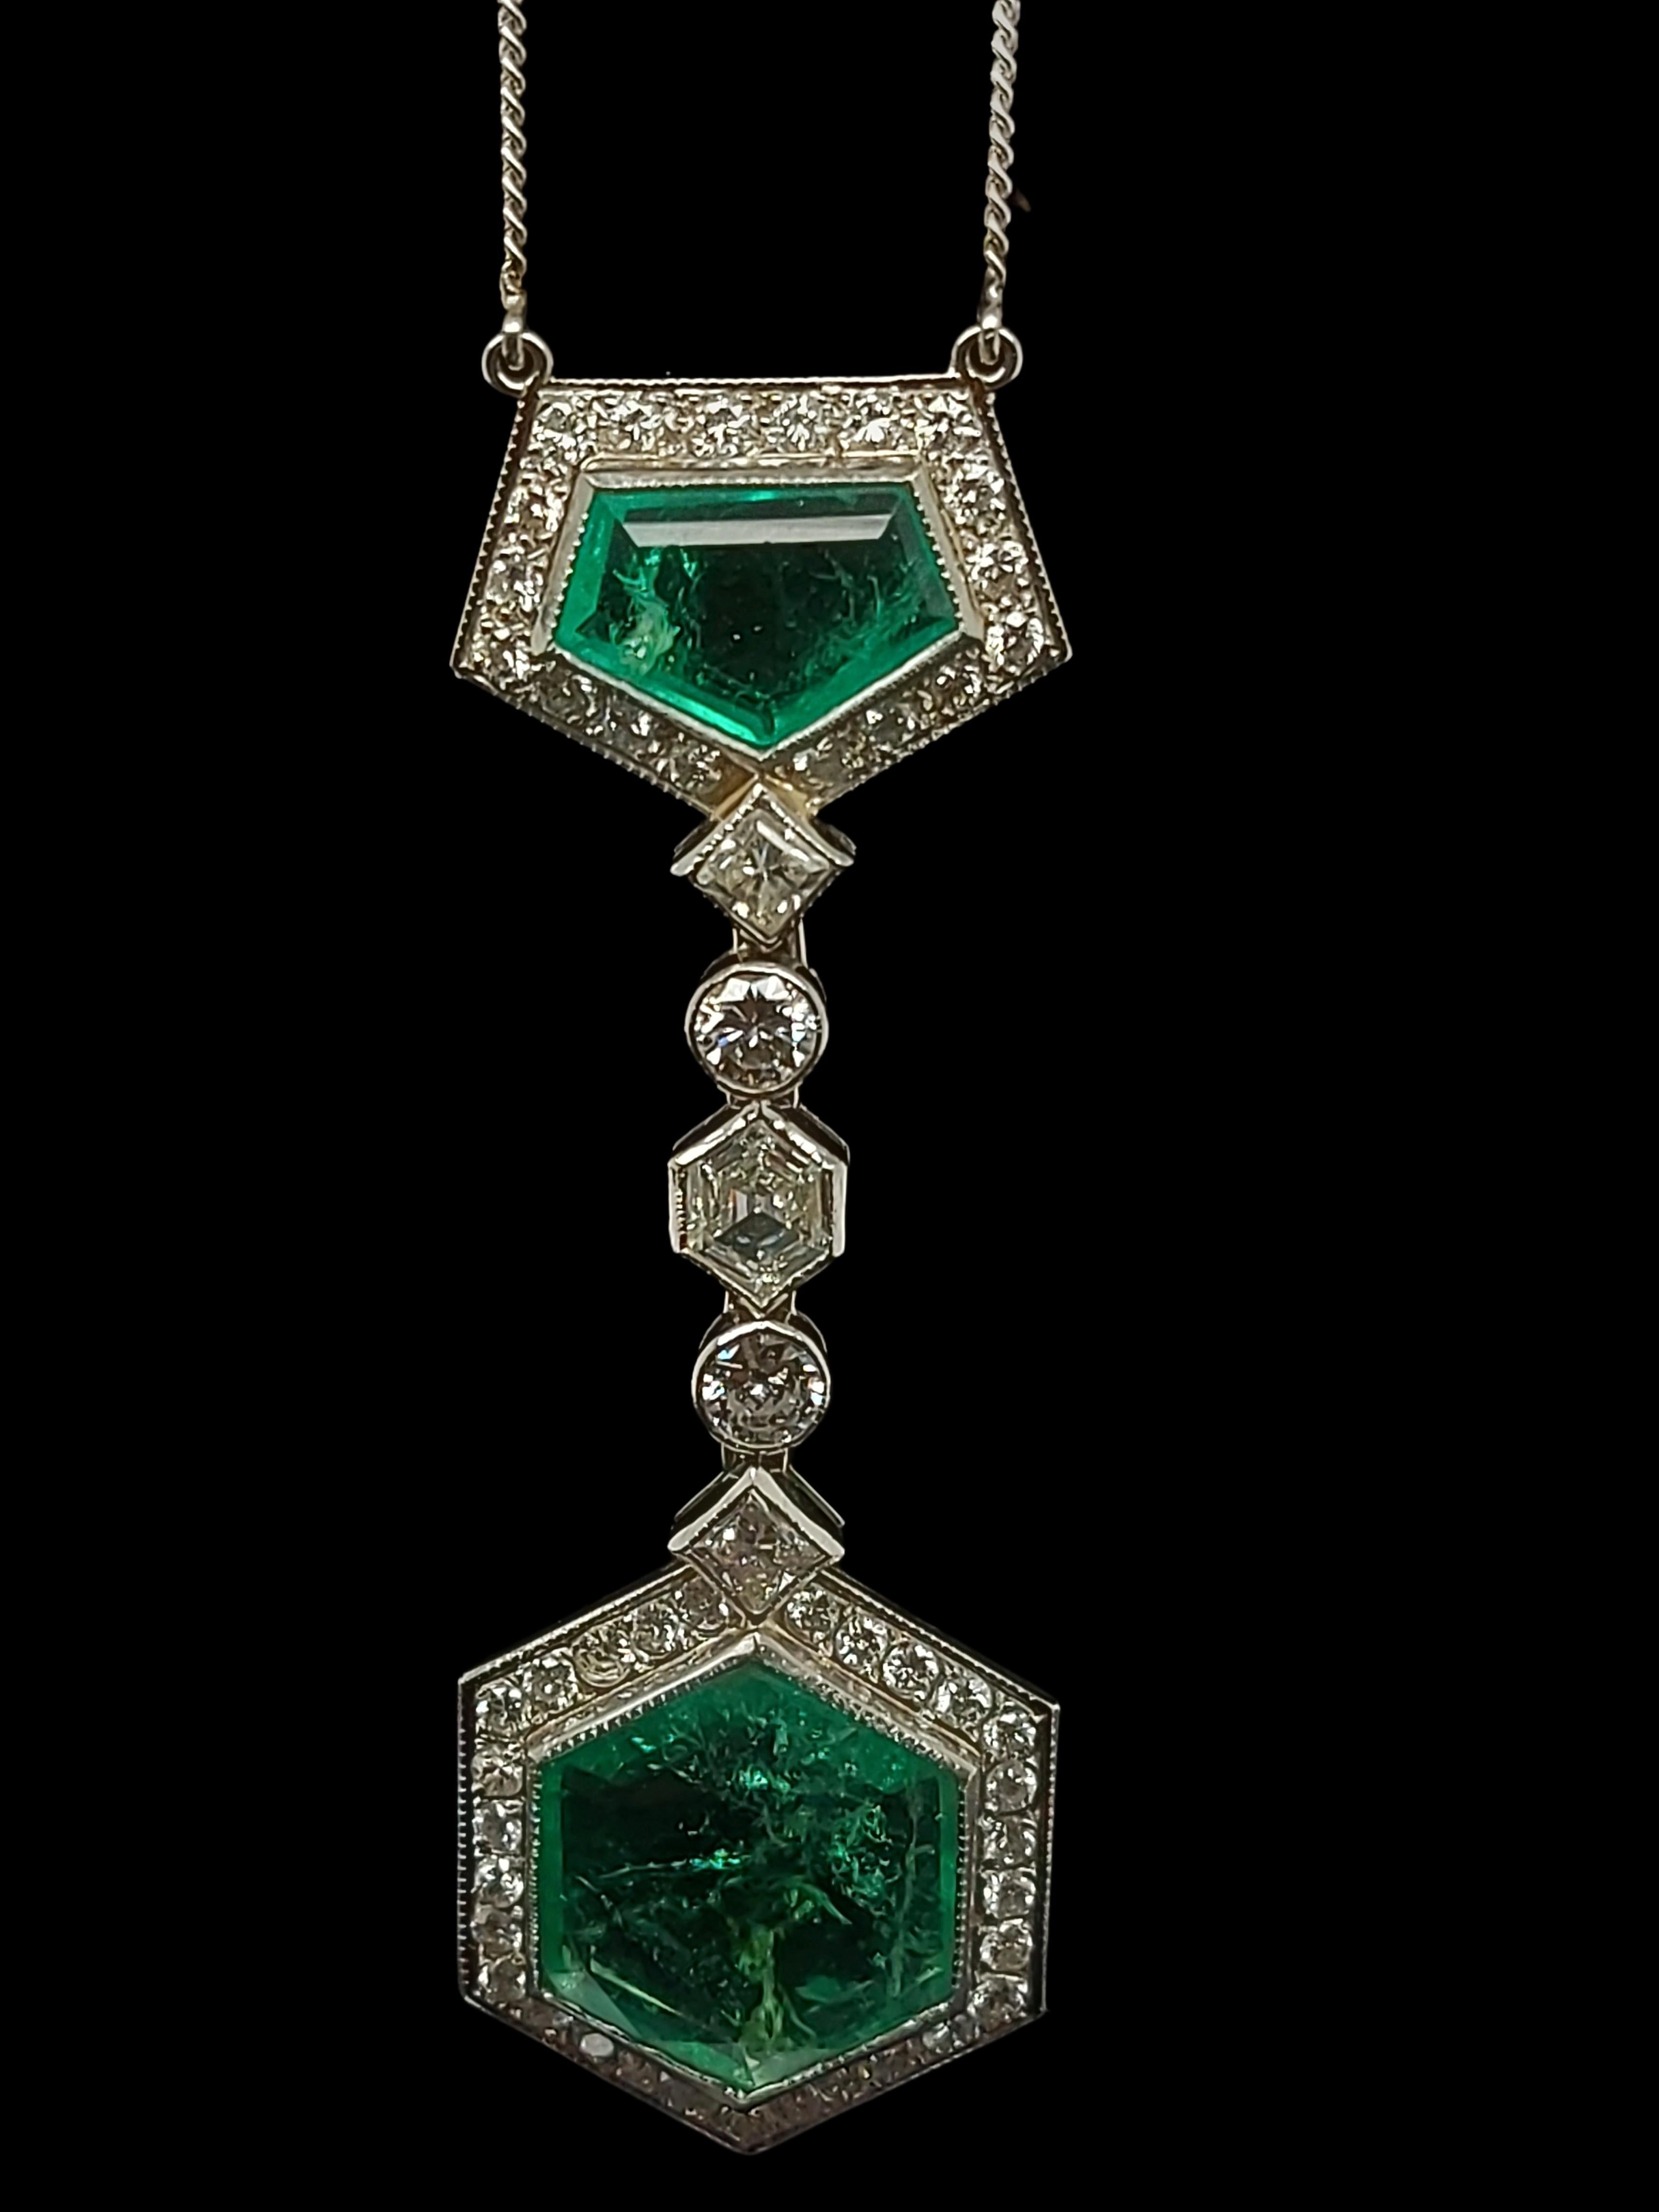 Gorgeous Necklace Set With 5.5 Ct Colombian Minor Emerald and Diamonds With Carat Gem Lab Certificate
Rare and collectable Colombian Emerald Necklace with spacial cuts .
The Emeralds are from beautiful color and shapes ,they look much bigger as they